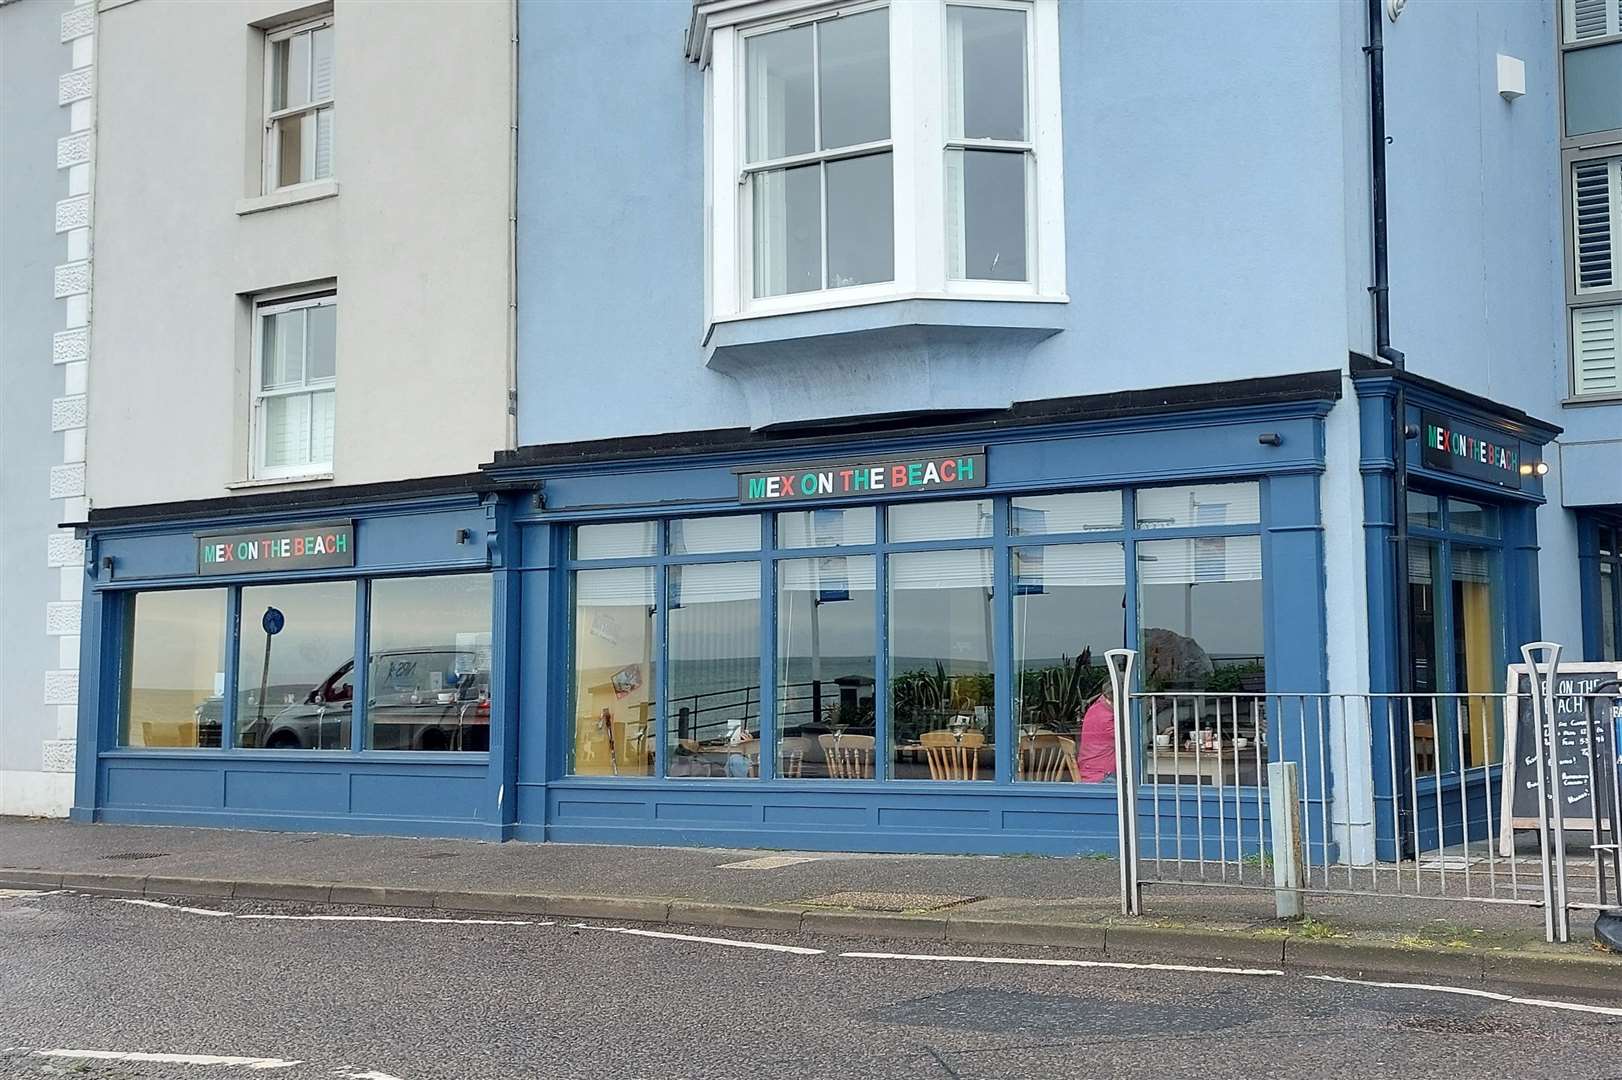 Mex On The Beach opened in Deal last month